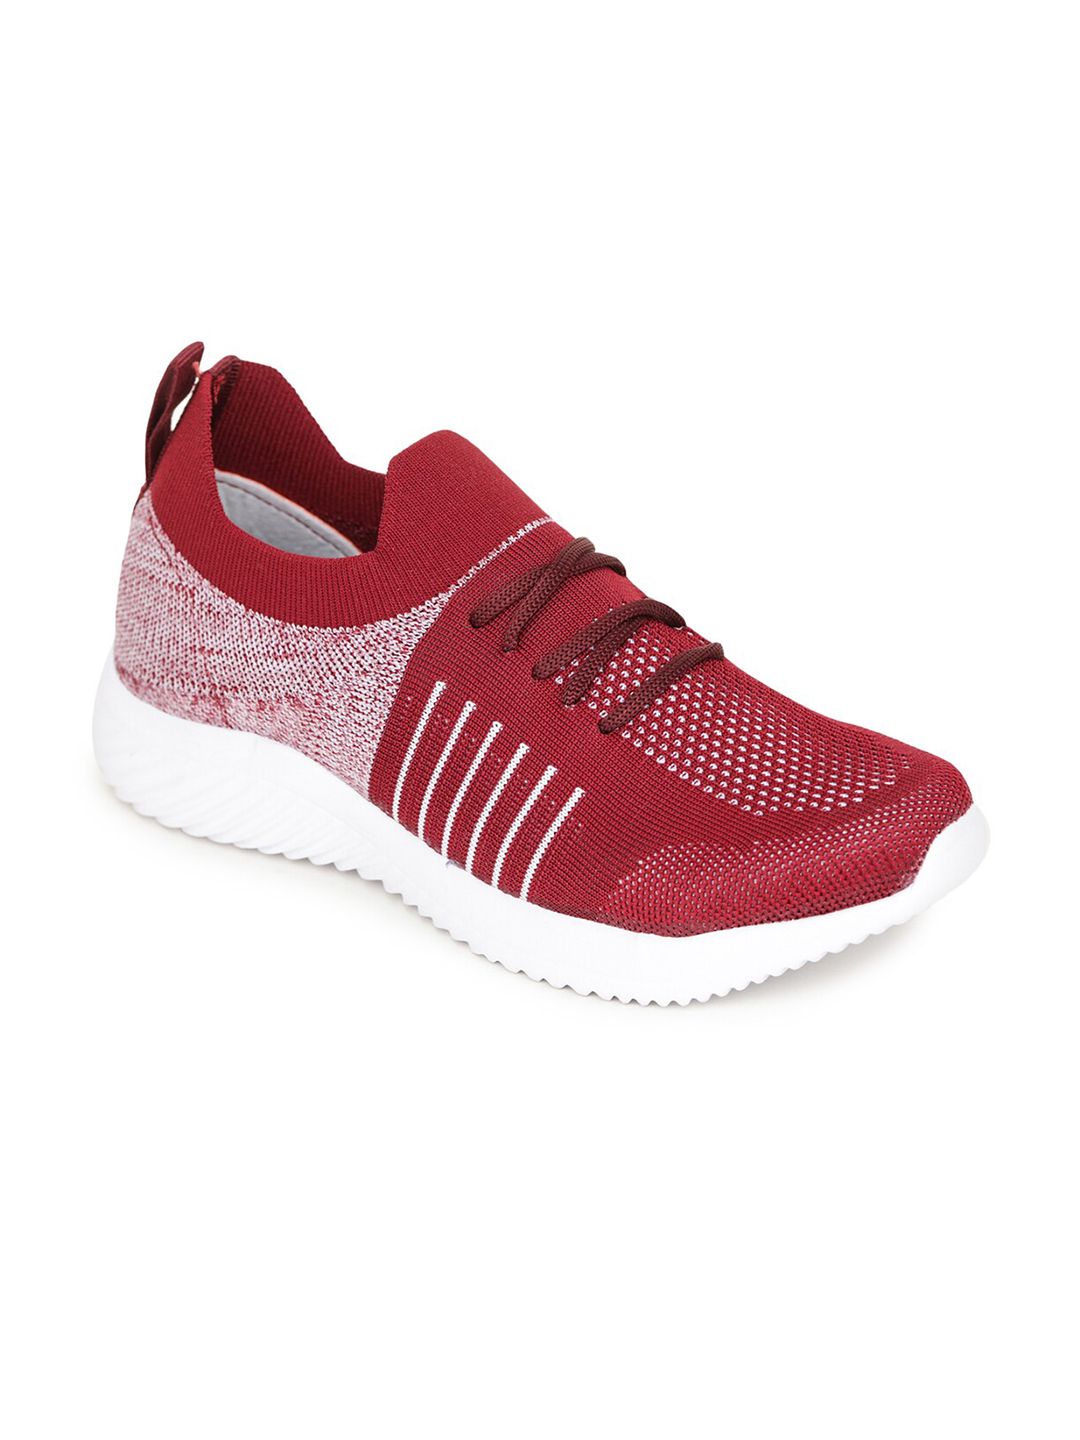 TRASE Women Maroon Mesh Running Shoes Price in India